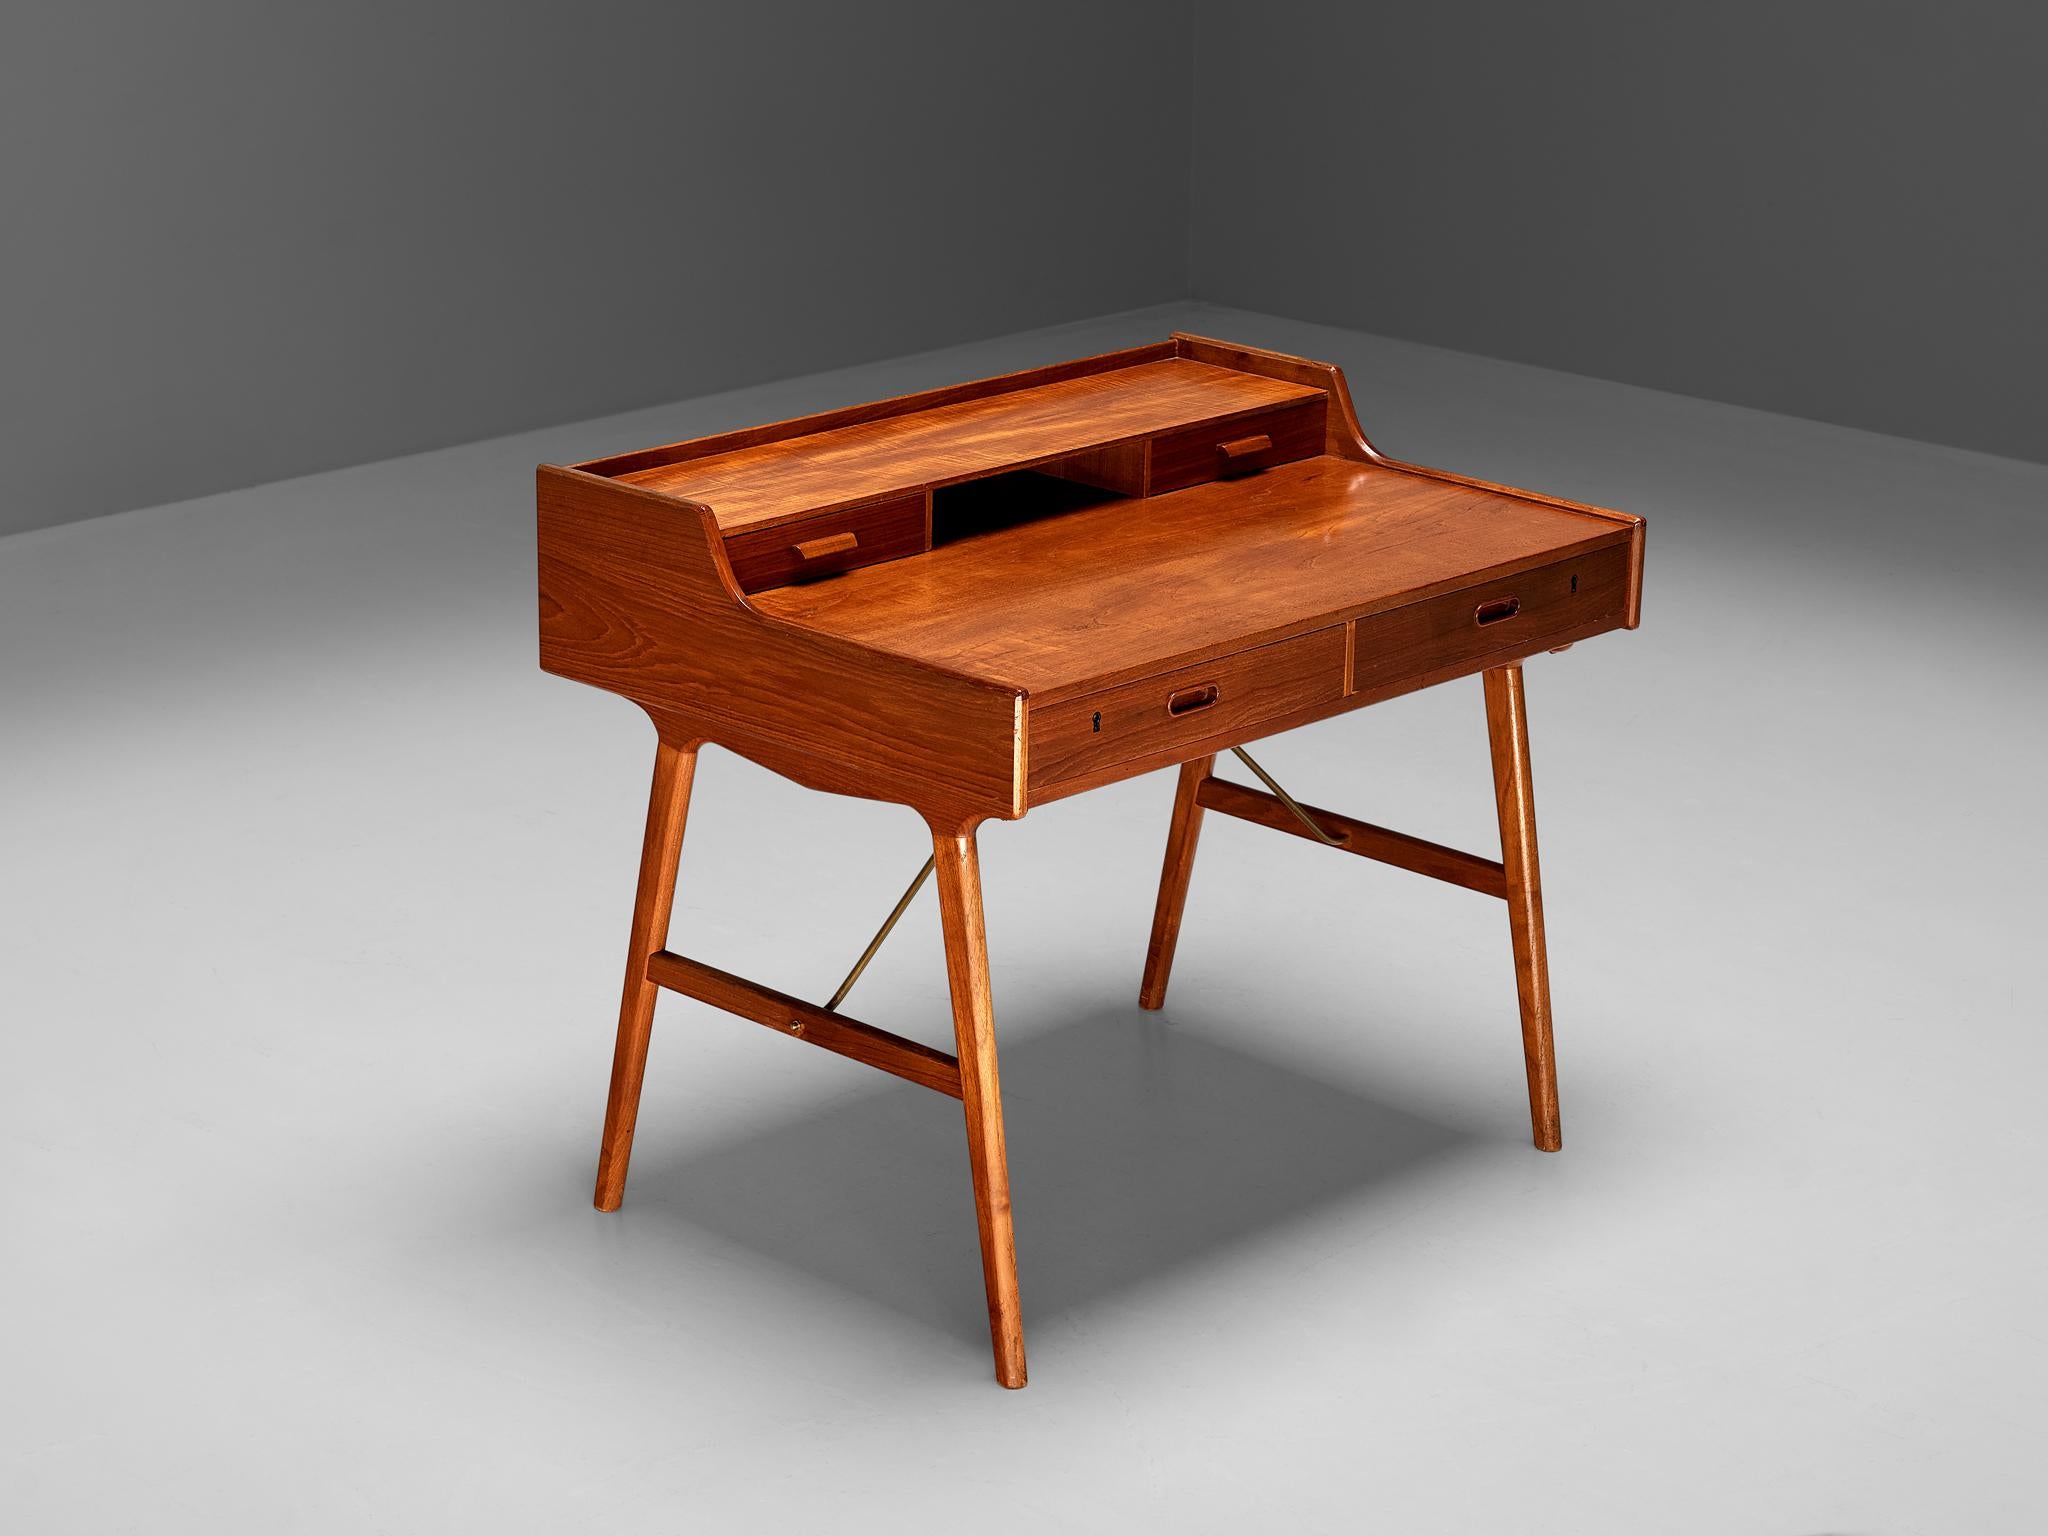 Arne Wahl Iversen for Vinde Møbelfabrik, desk, model 65, teak, brass, Denmark, 1960s.

Refined desk by Danish designer Arne Wahl Iversen. This small writing table has a beautiful open look due to the high cylindrical legs. The table with two levels